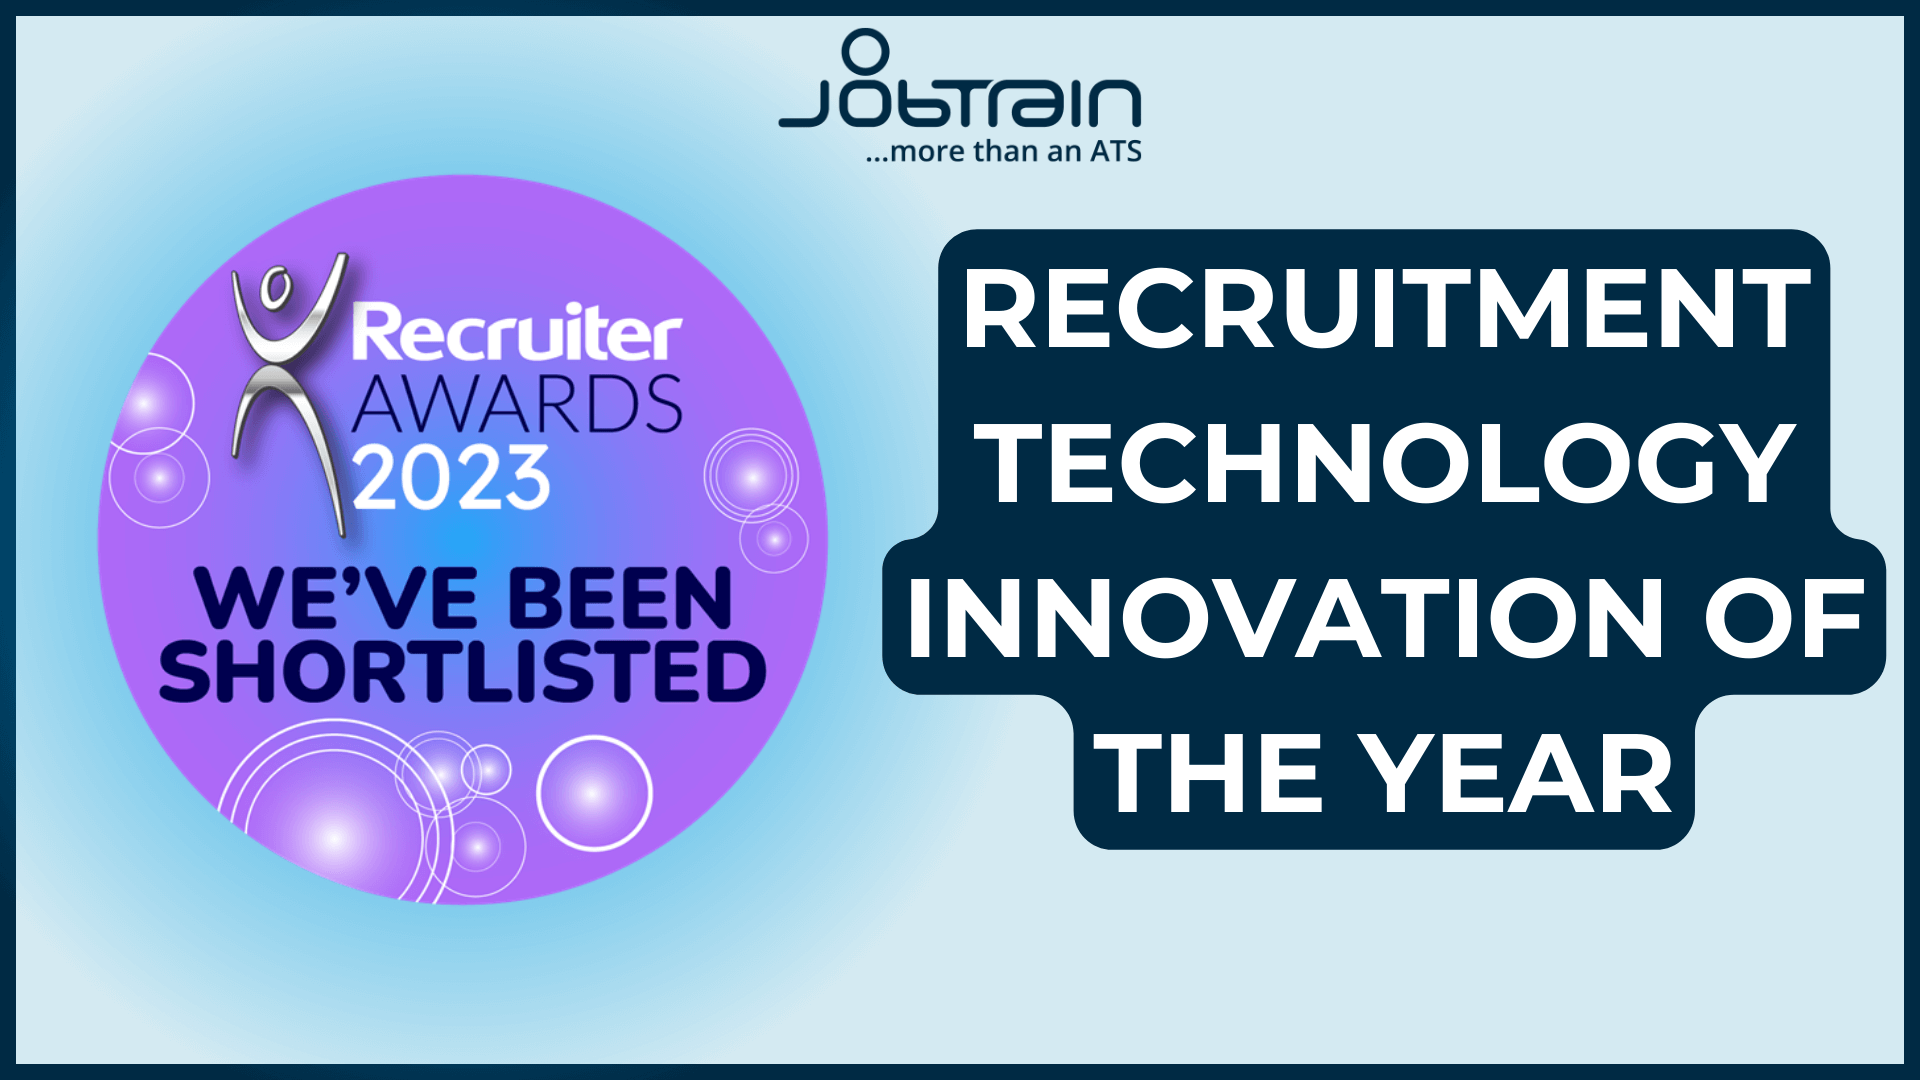 We are a finalist for the 2023 Recruiter awards